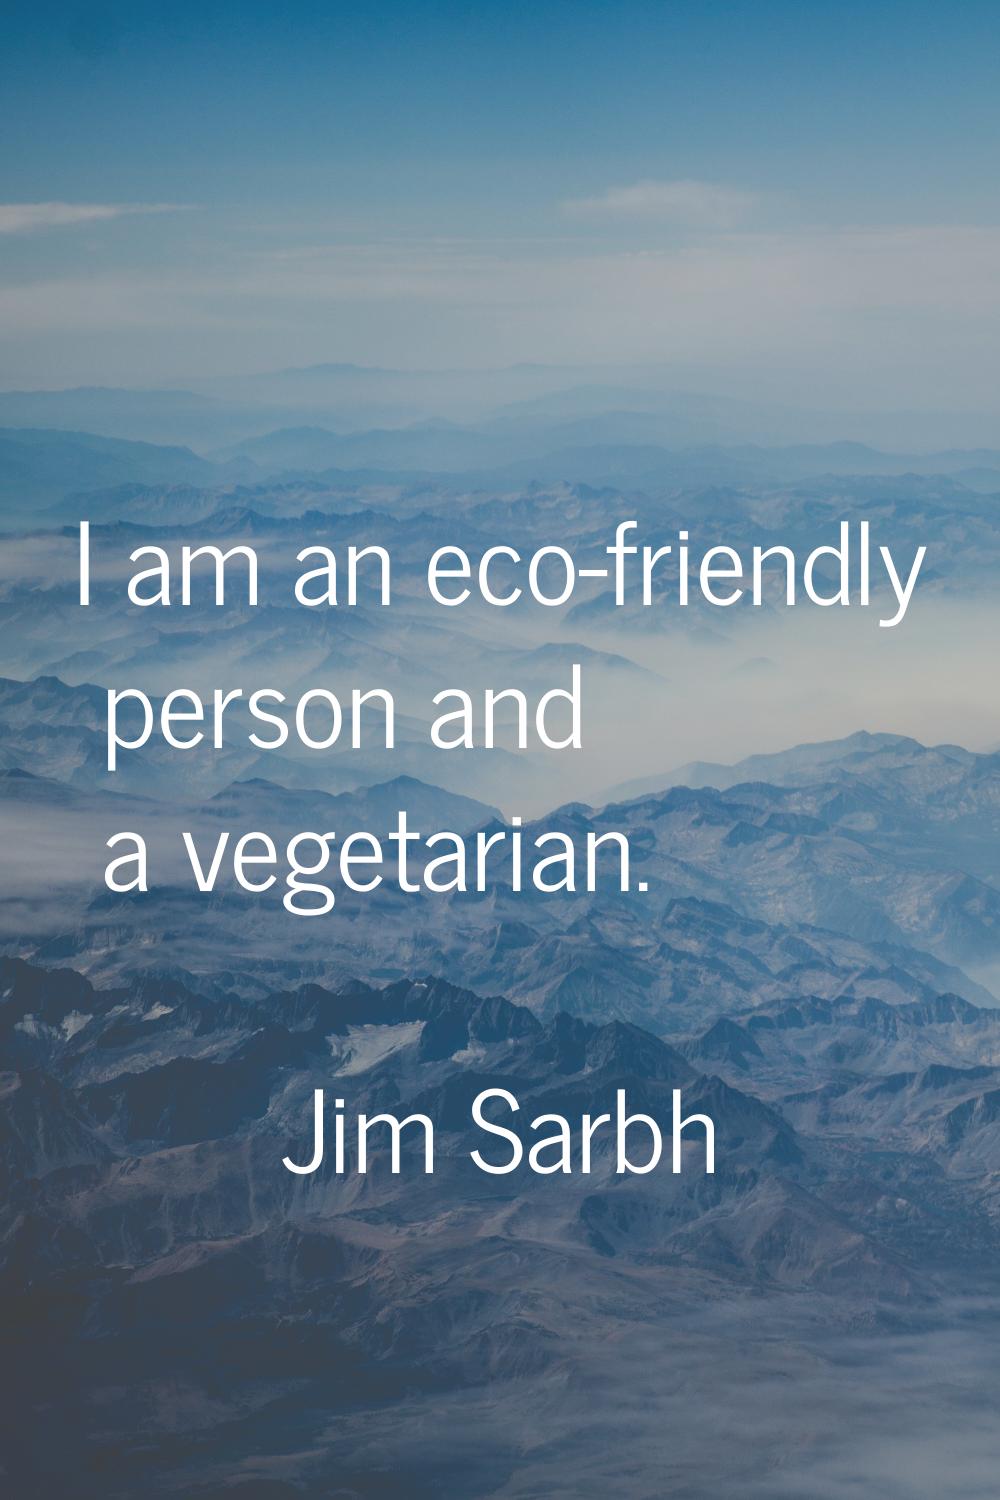 I am an eco-friendly person and a vegetarian.